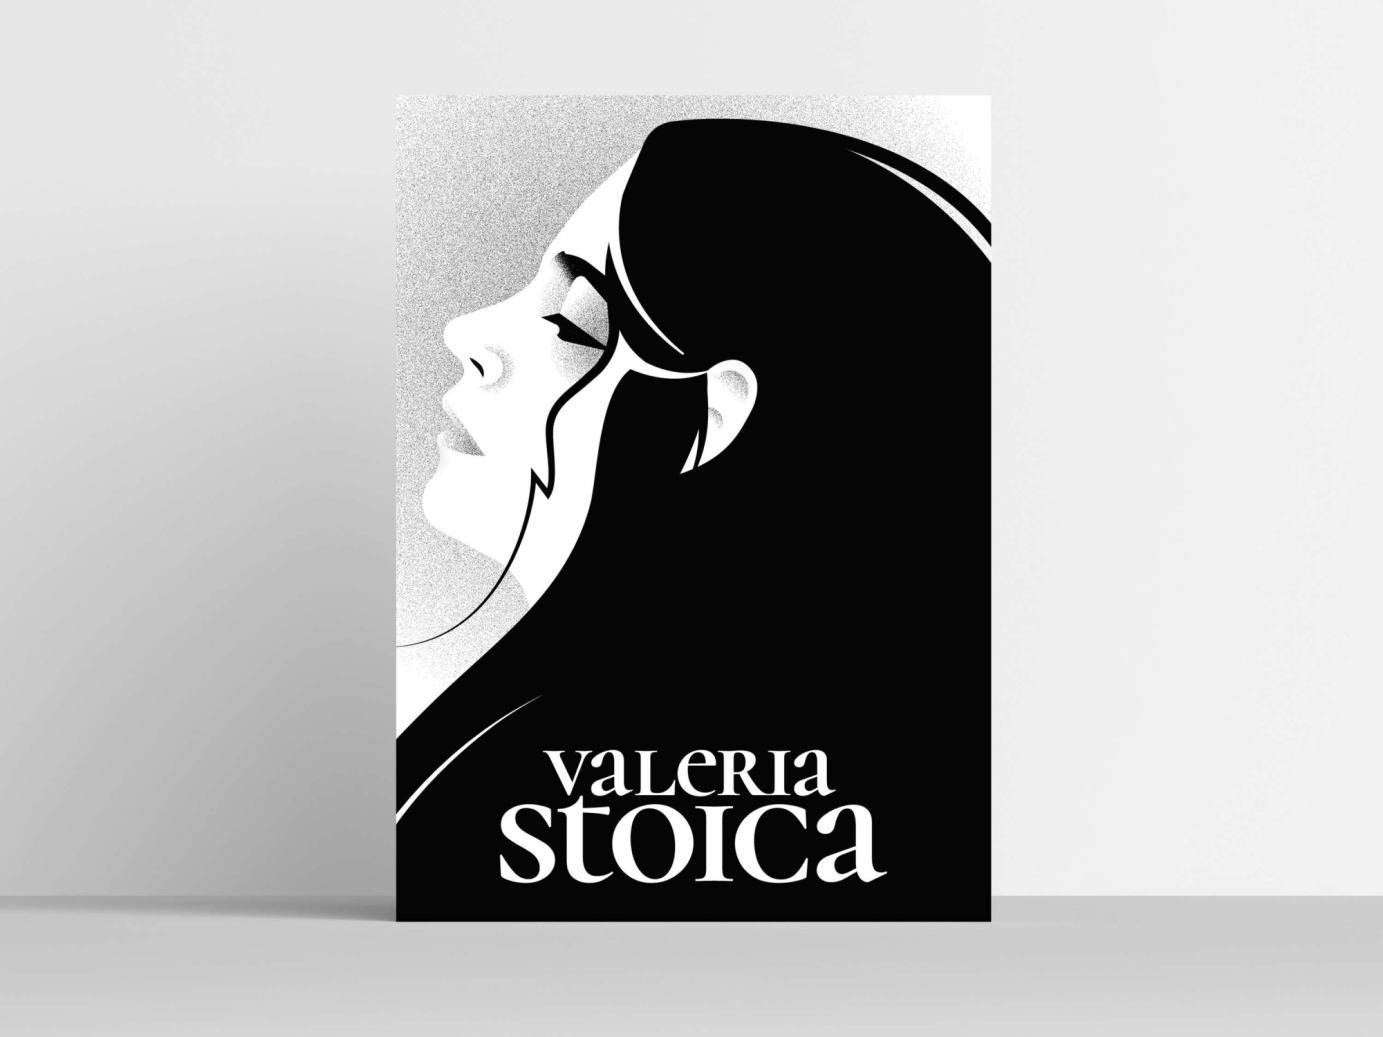 Series of posters for singer Valeria Stoica